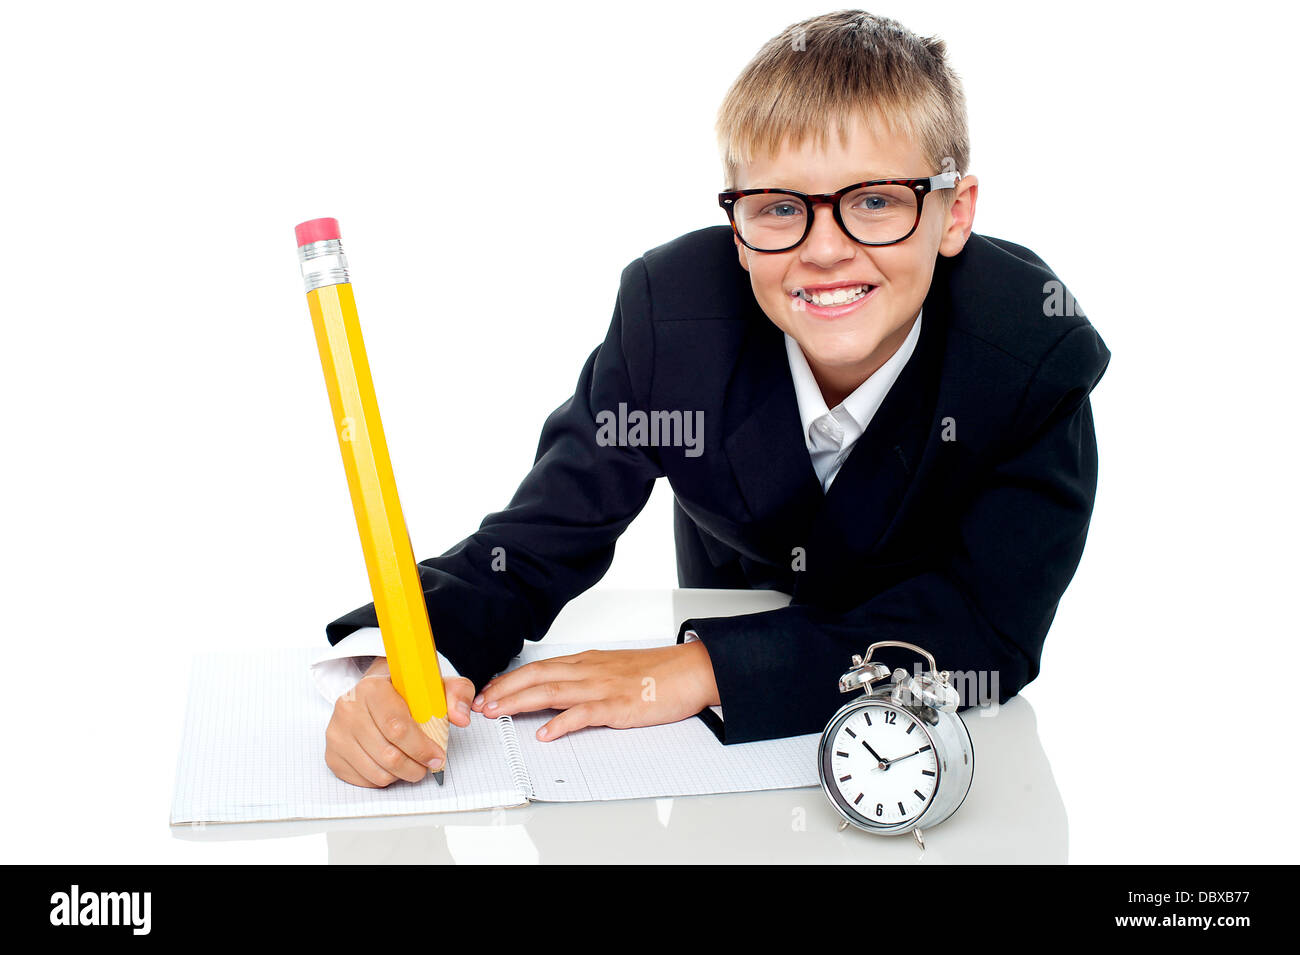 Casual shot of a school kid finishing his assignment in time Stock Photo